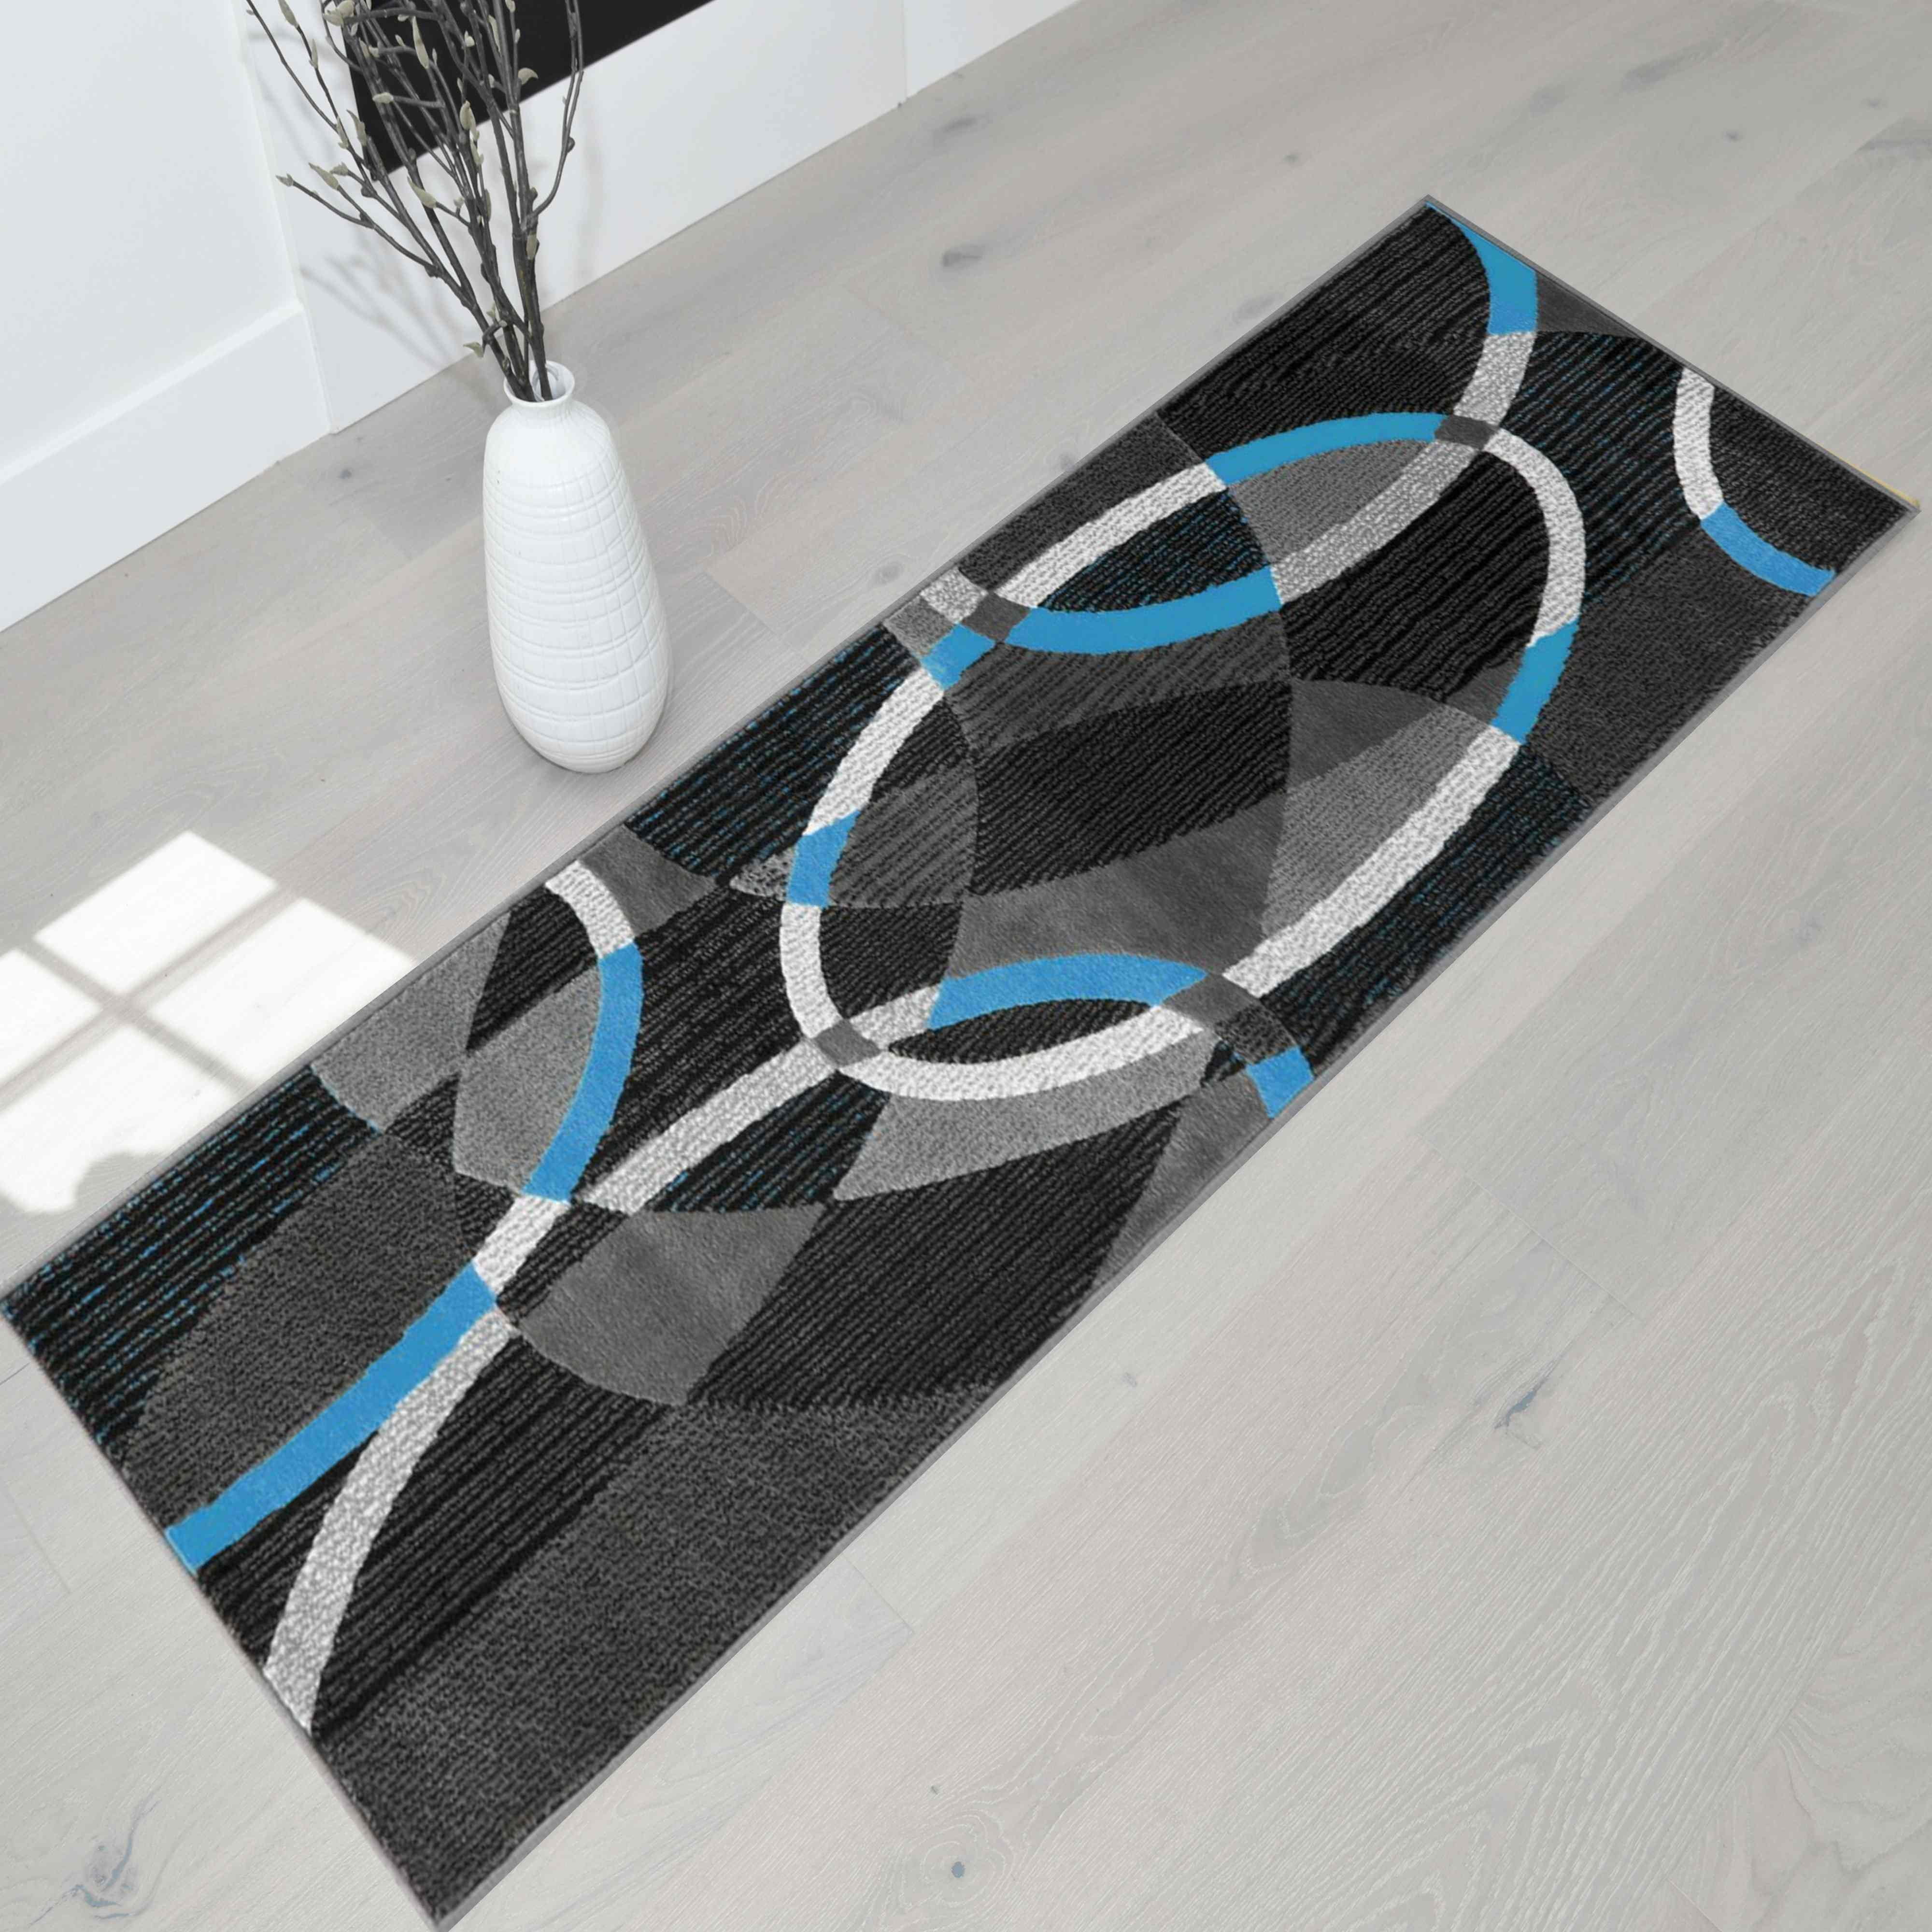 Blue/Grey/Silver/Black/Abstract Area Rug Modern Contemporary Circles and... 